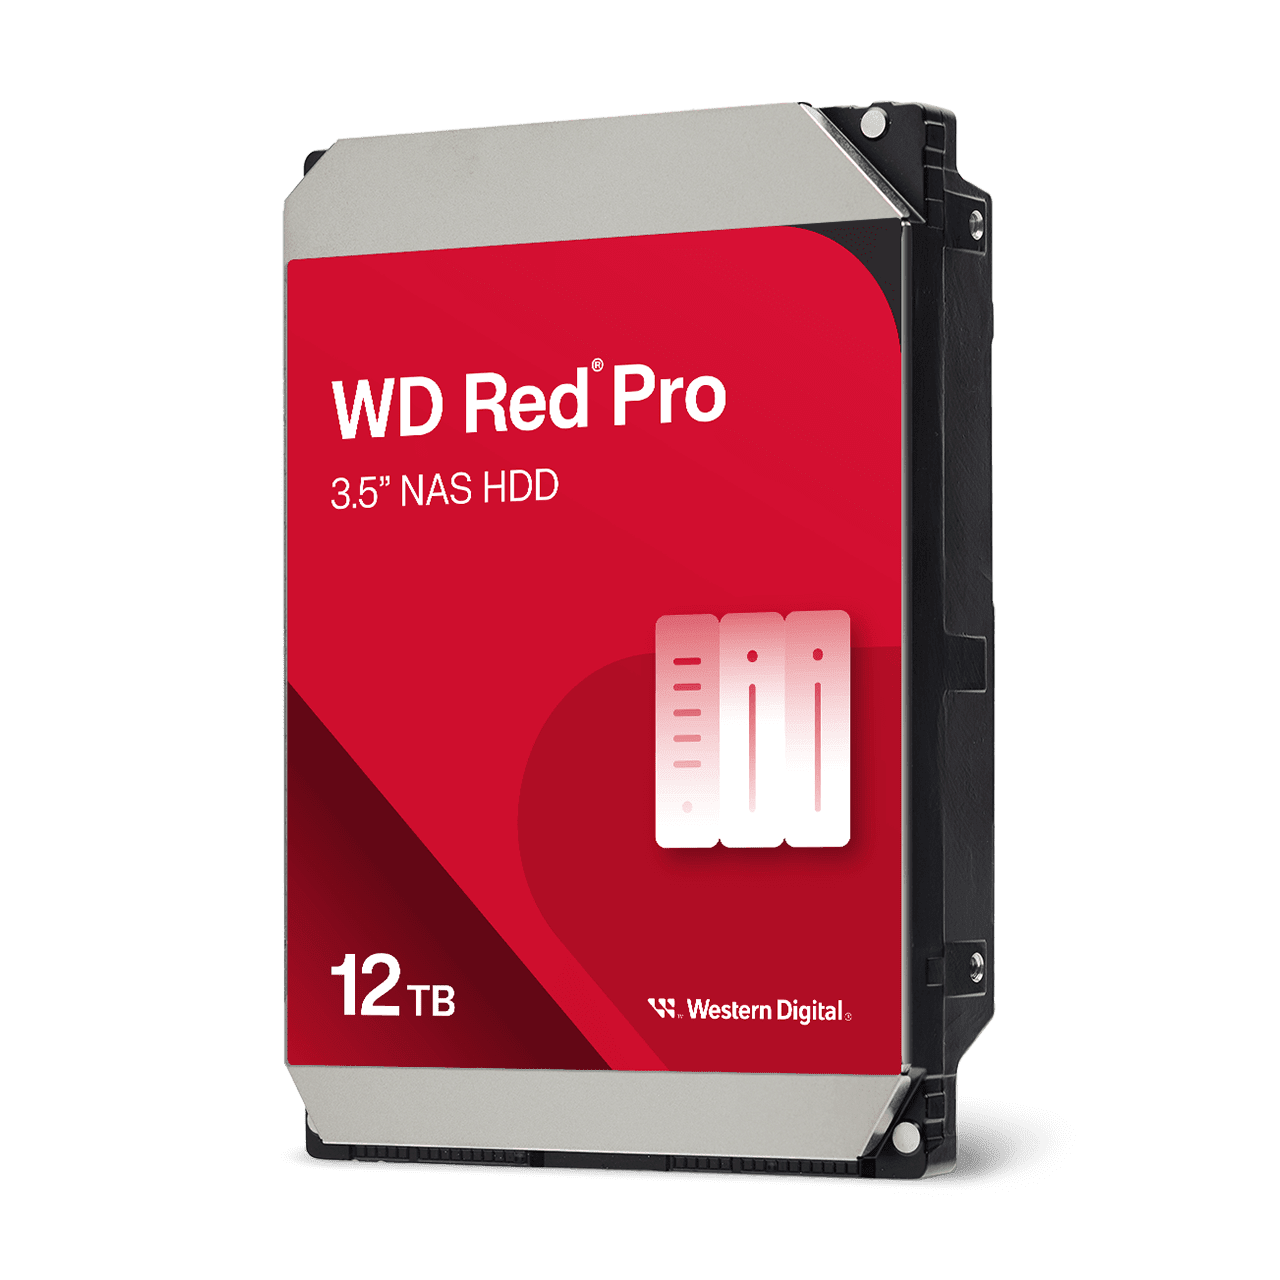 WD Red™ Pro 12TB NAS Hard Drive - Image6